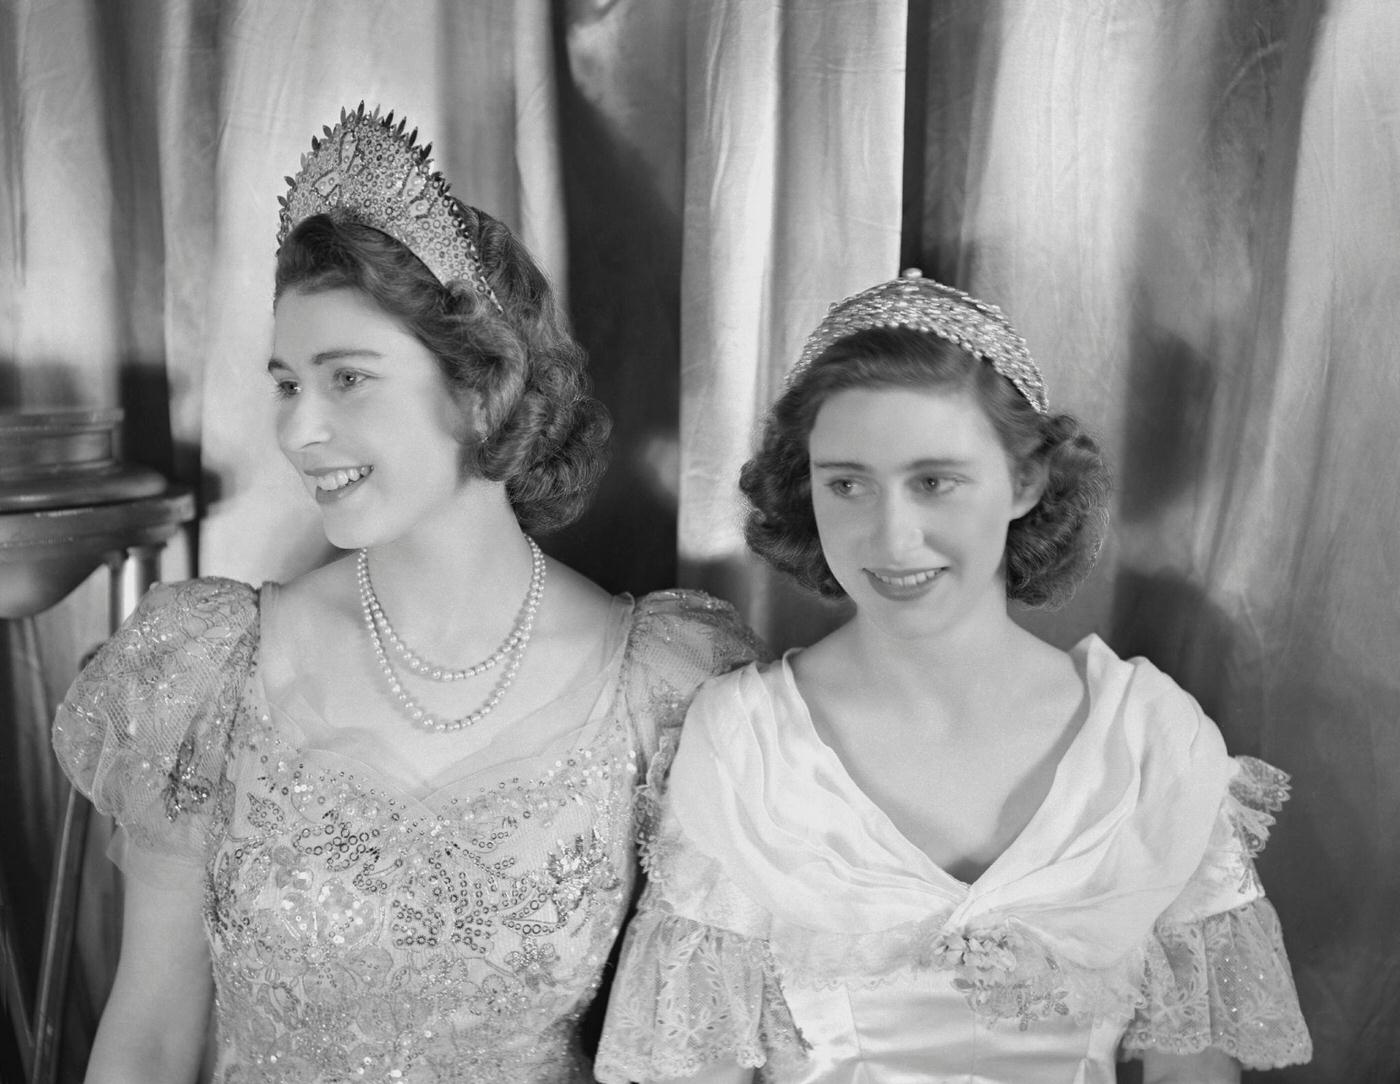 Princess Elizabeth and Princess Margaret in a royal pantomime production of 'Old Mother Red Riding Boots' at Windsor Castle, 1944